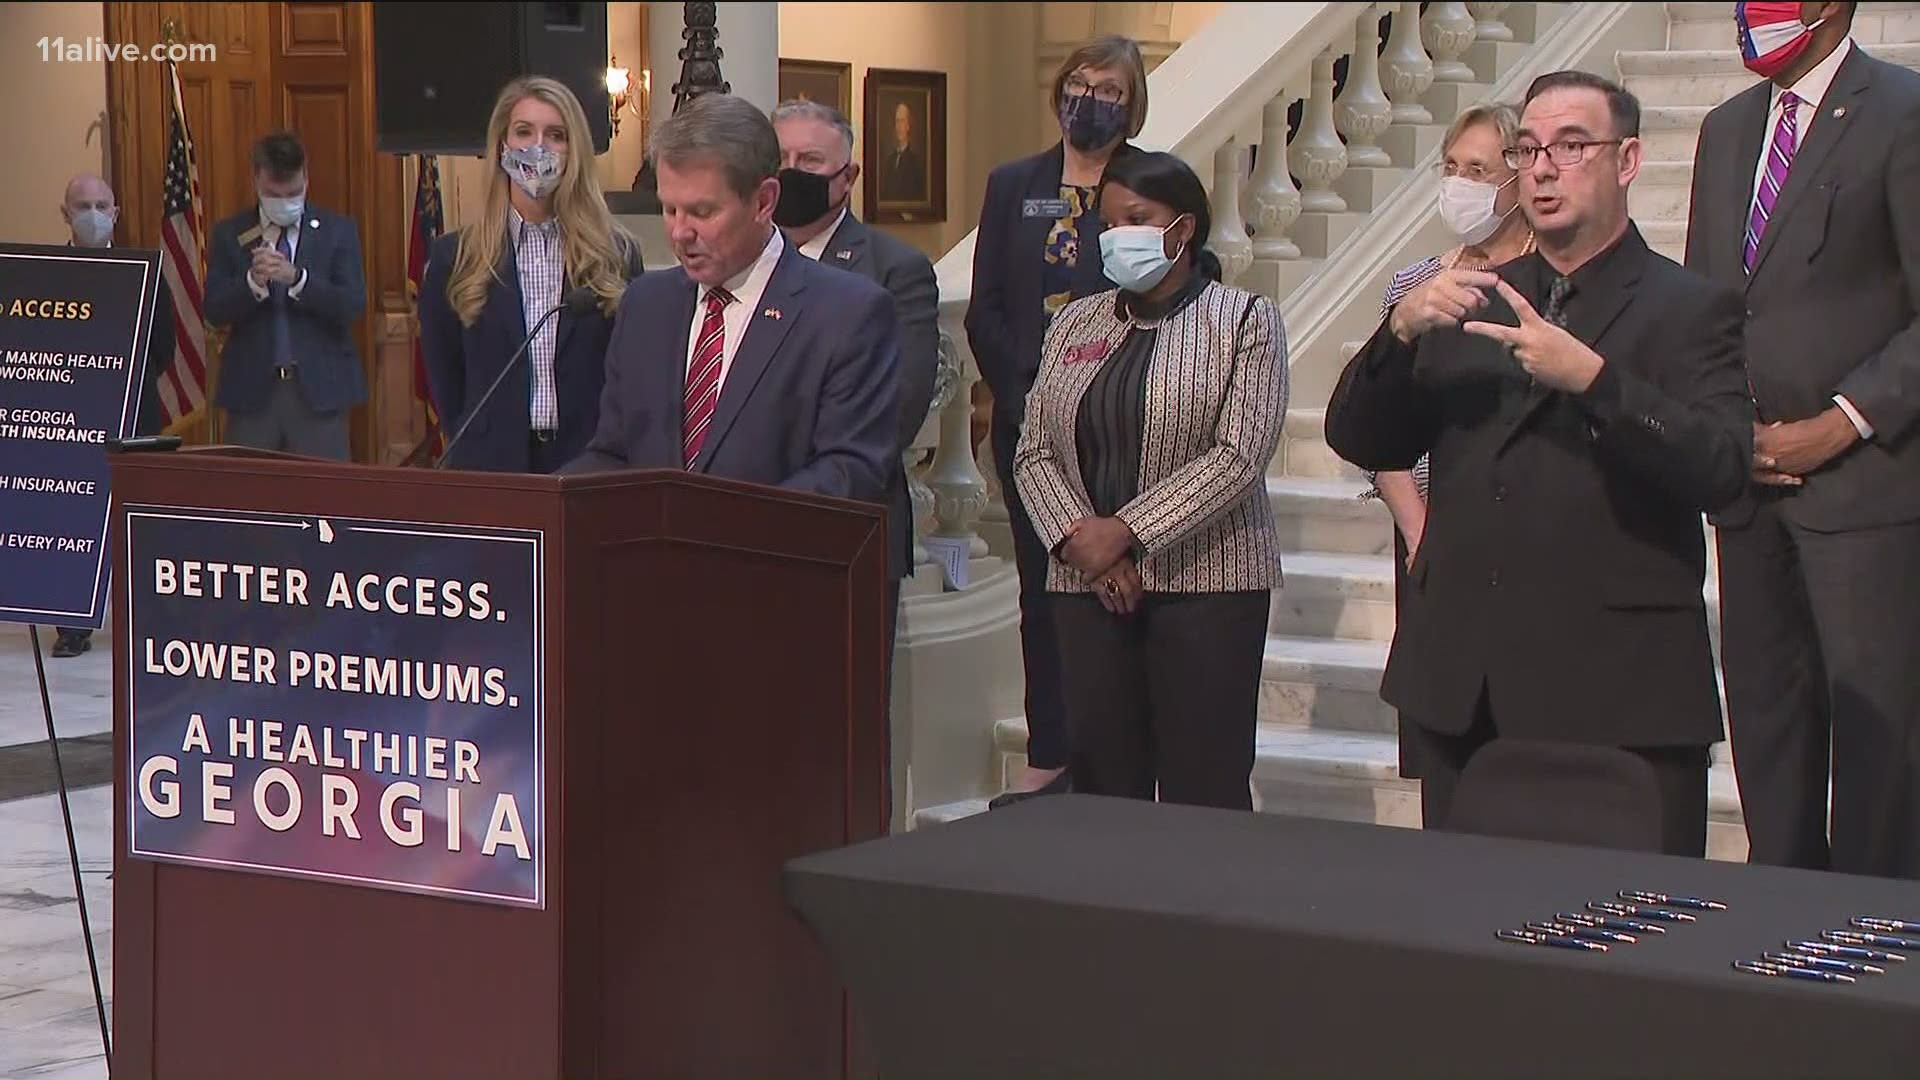 Georgia Gov. Brian Kemp announced federal approval of the state's program to provide a waiver for those seeking health insurance.